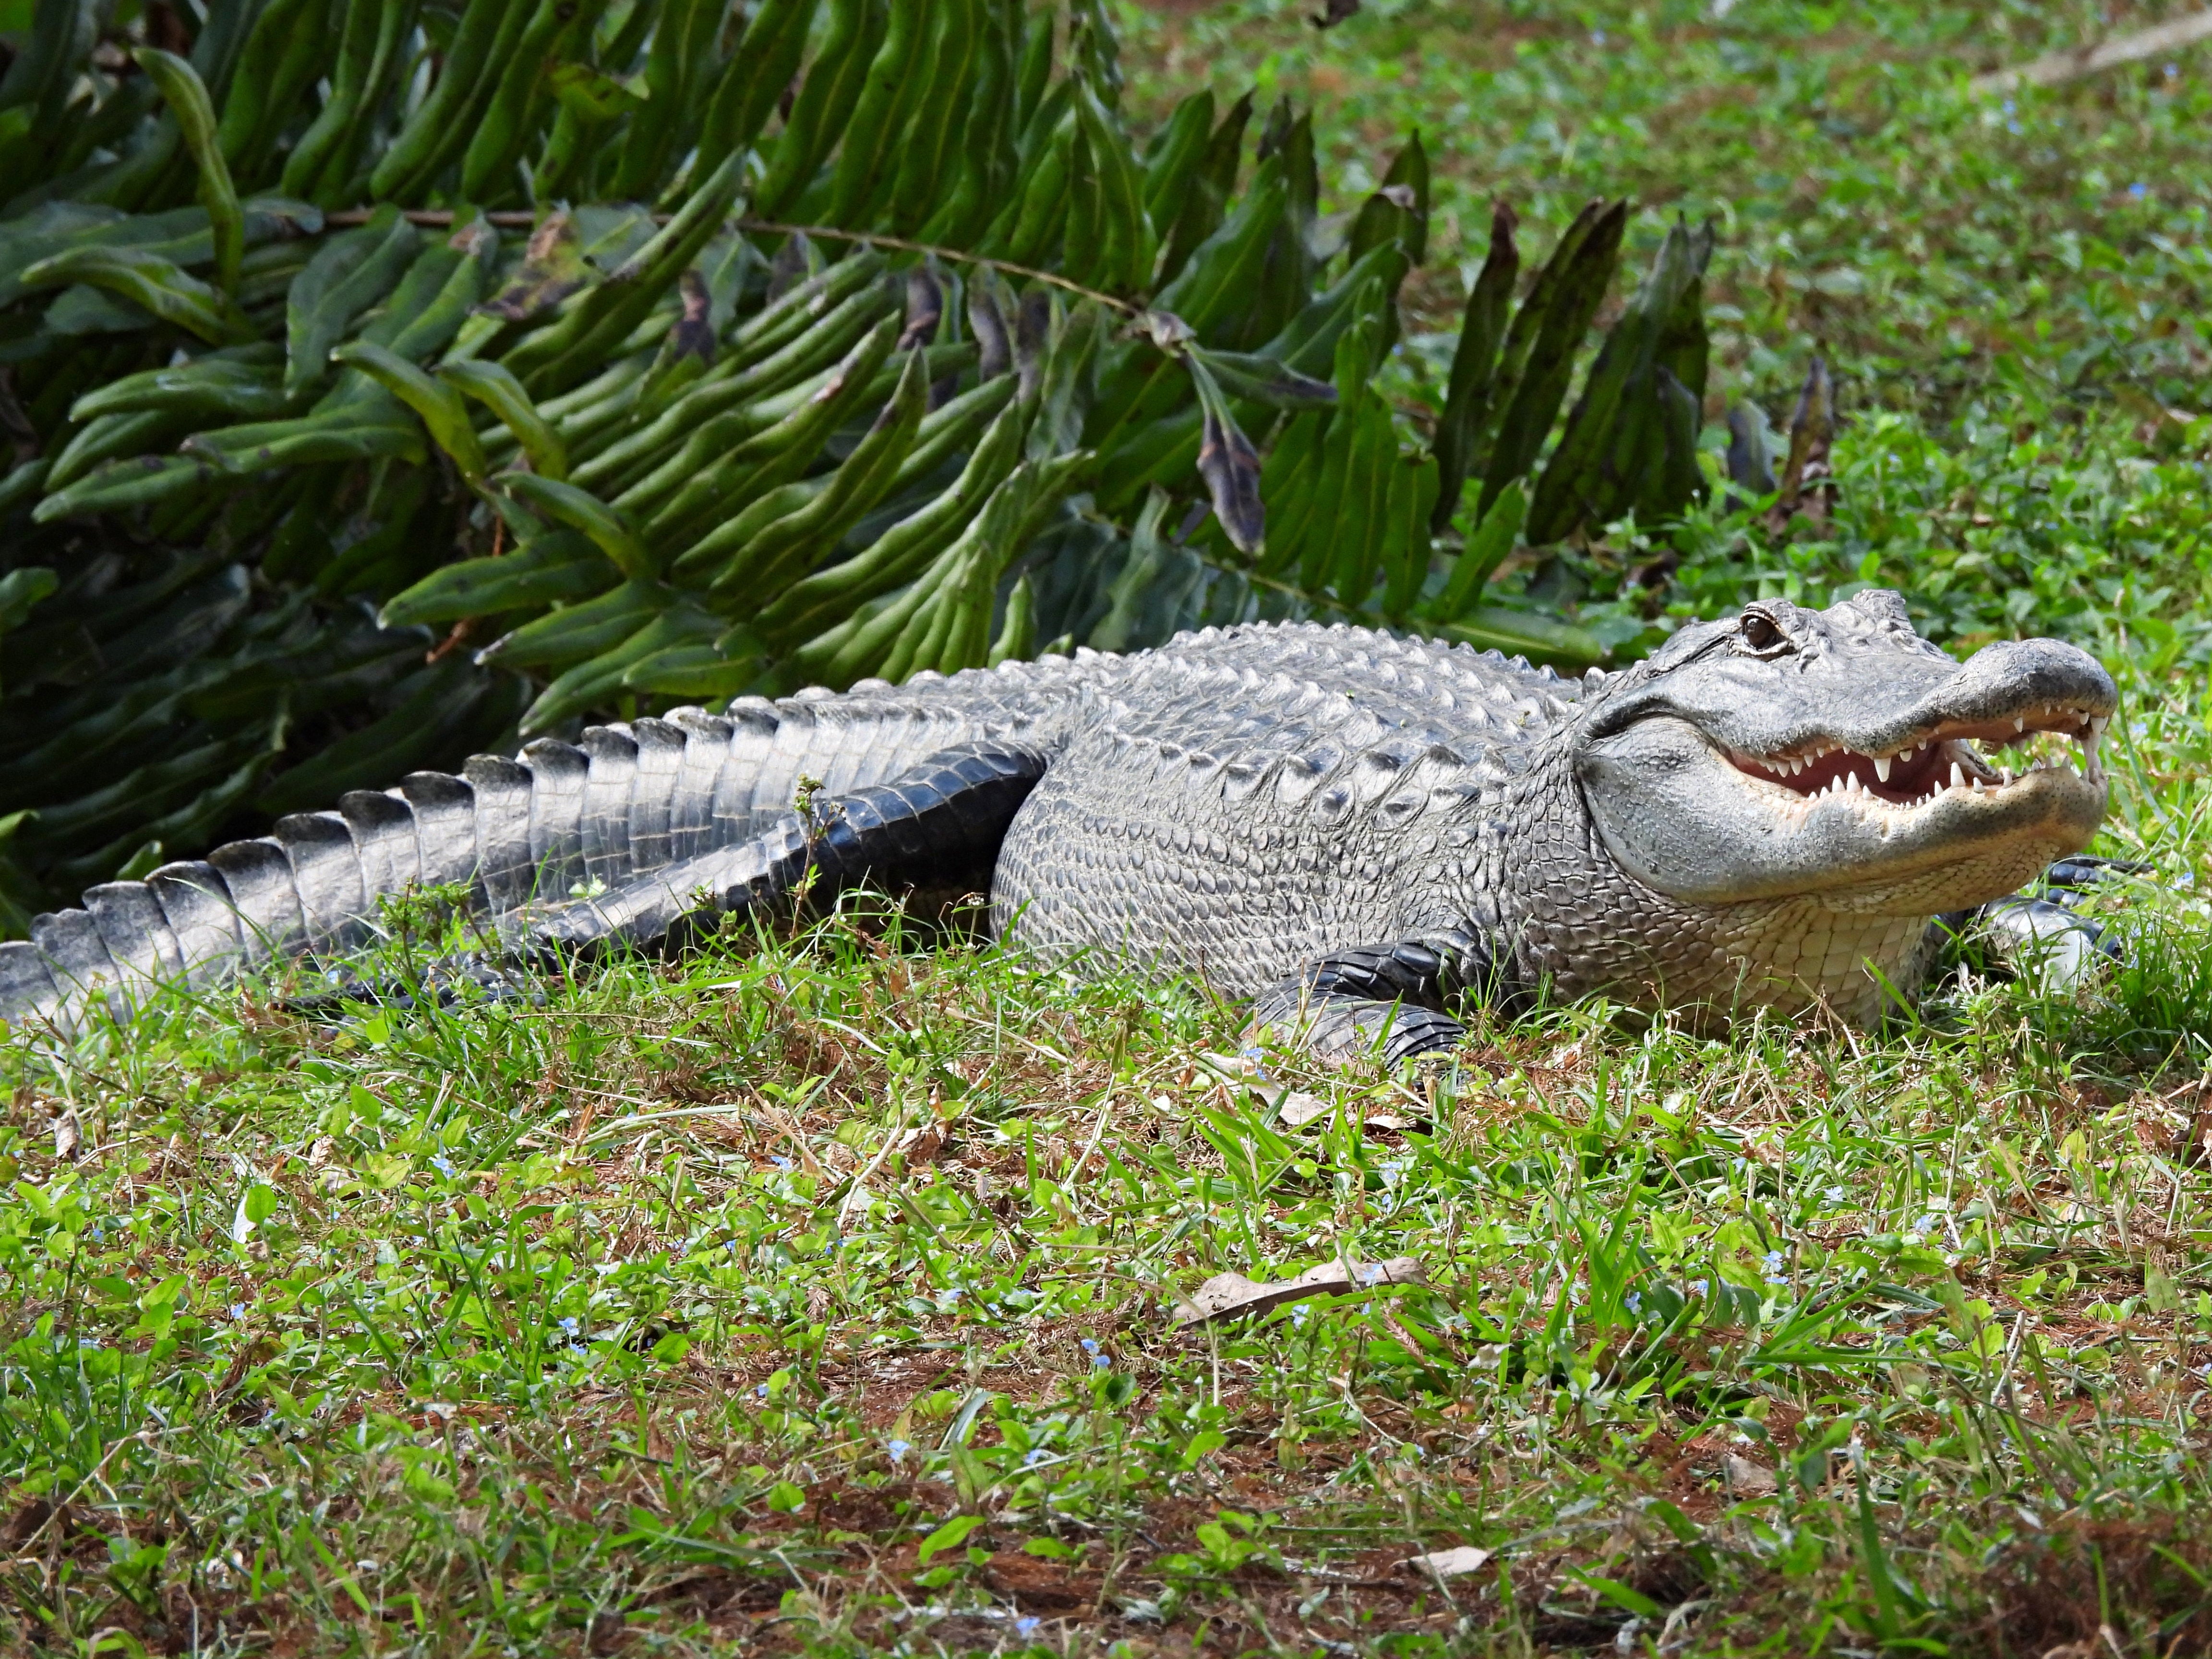 Police determined a person was pulled into the water by an alligator